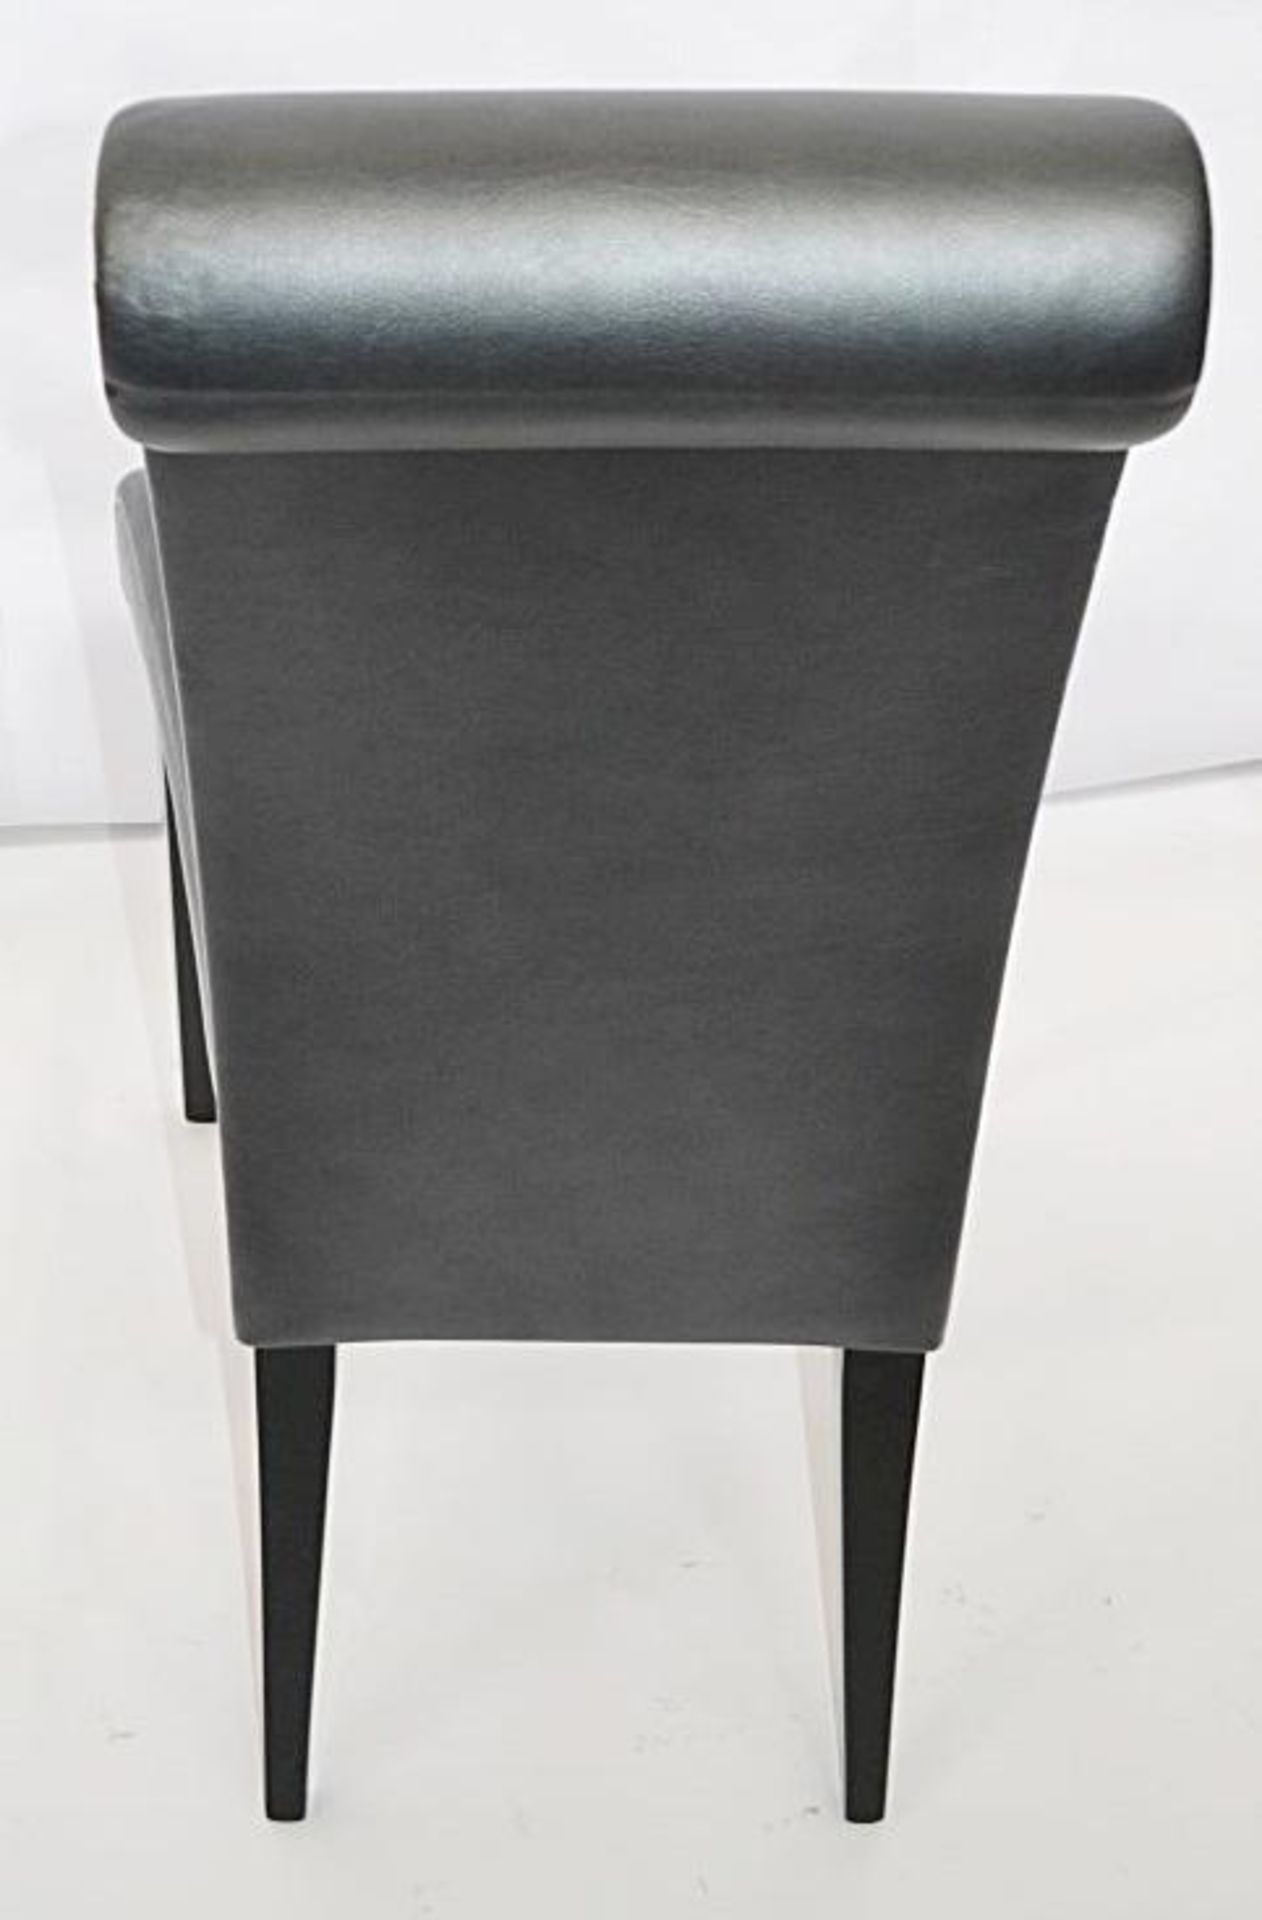 1 x CATTALAN “Lulu” High Back Chair – Upholstered In A Rich Metallic Charcoal - Dimensions: W50 x H9 - Image 3 of 8